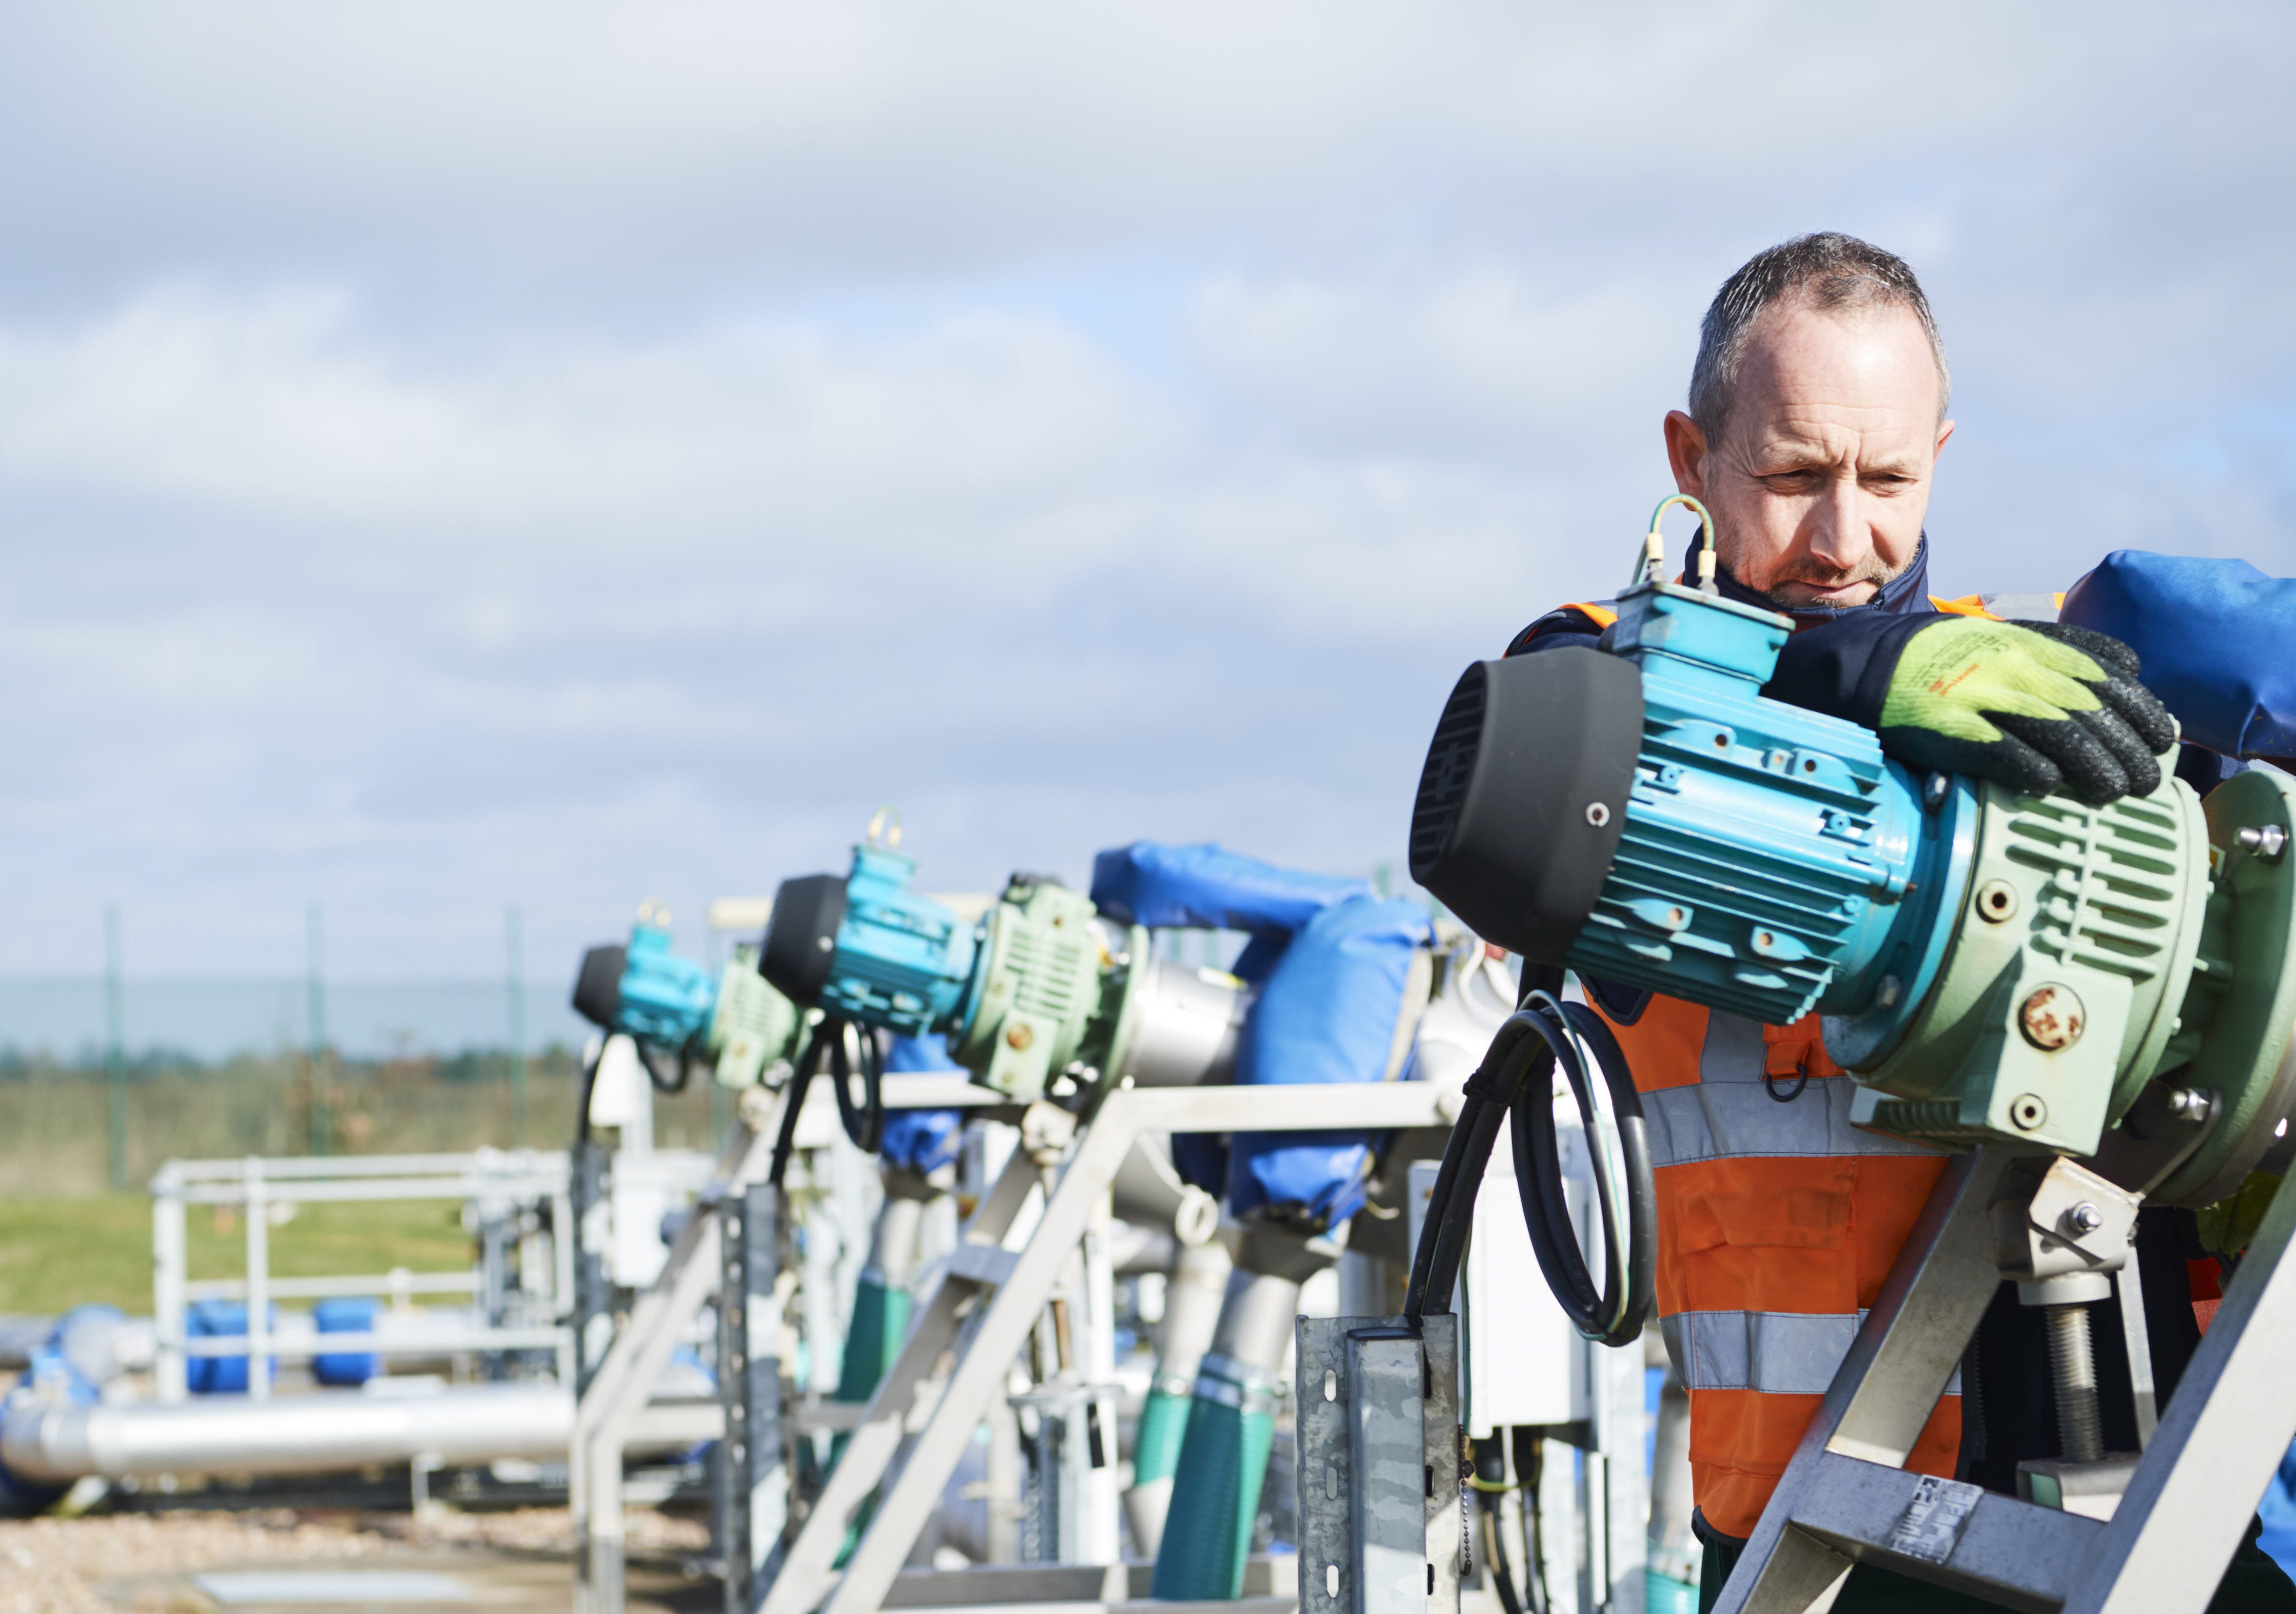 Male in high vis jacket looking at a water cannon device at water treatment centre